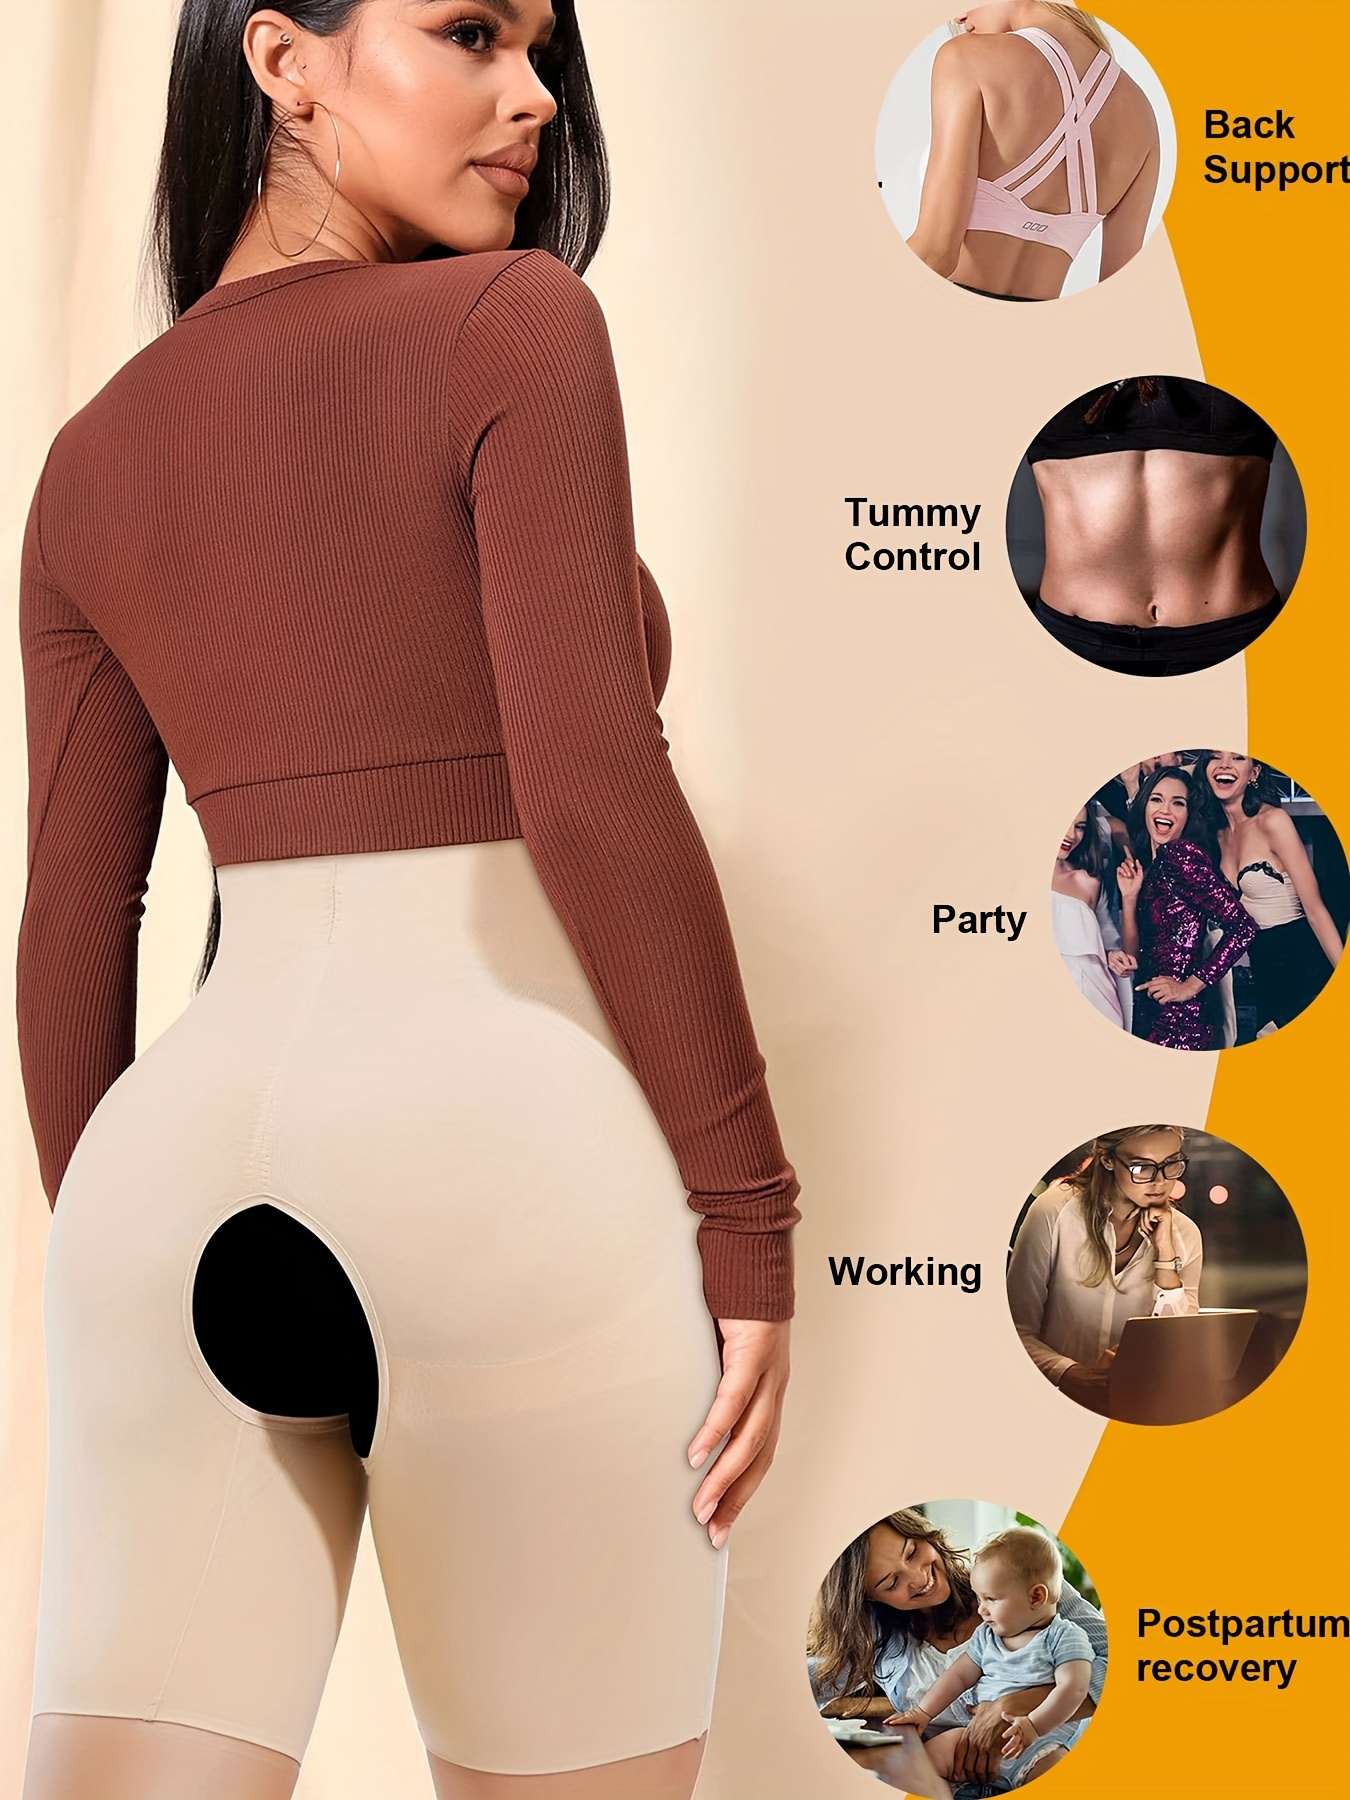 Shaping garments can control the tummy and lift the buttocks, and